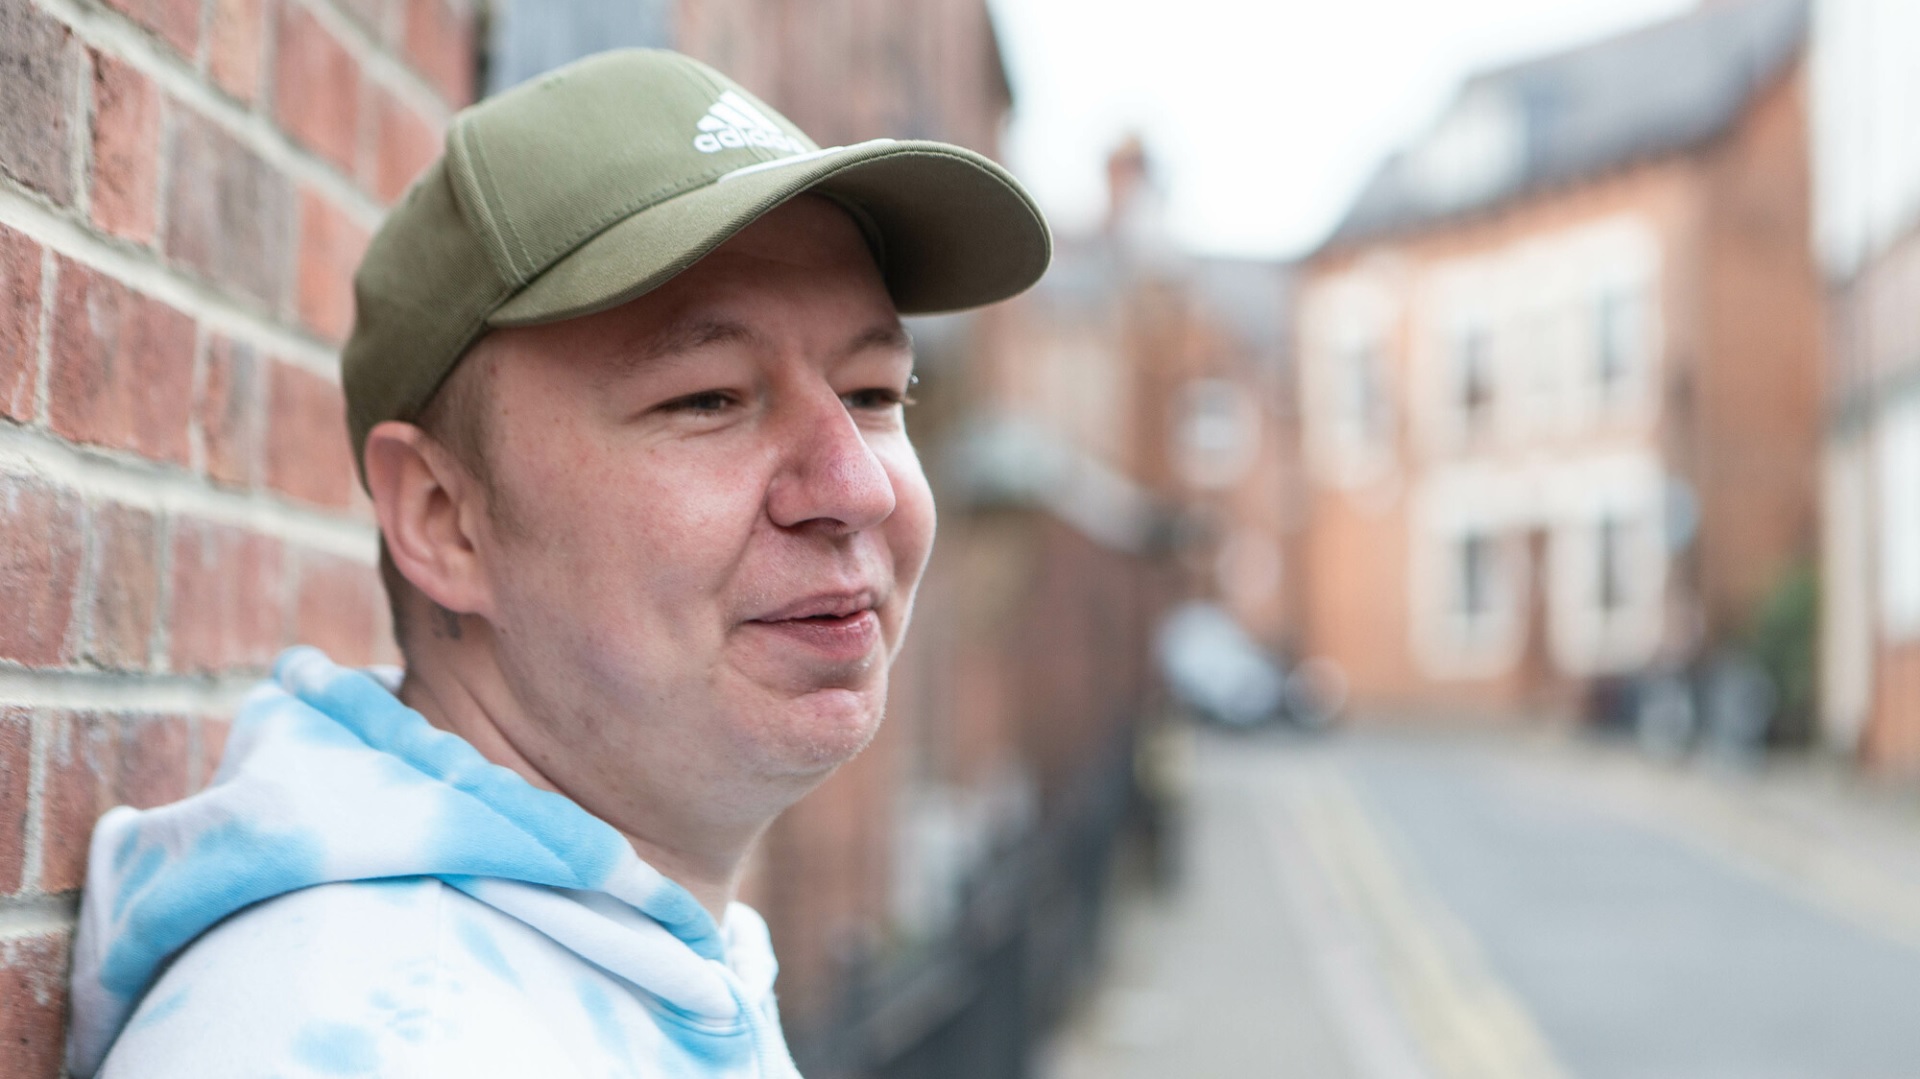 Martin has faced homelessness and lived in temporary accommodation